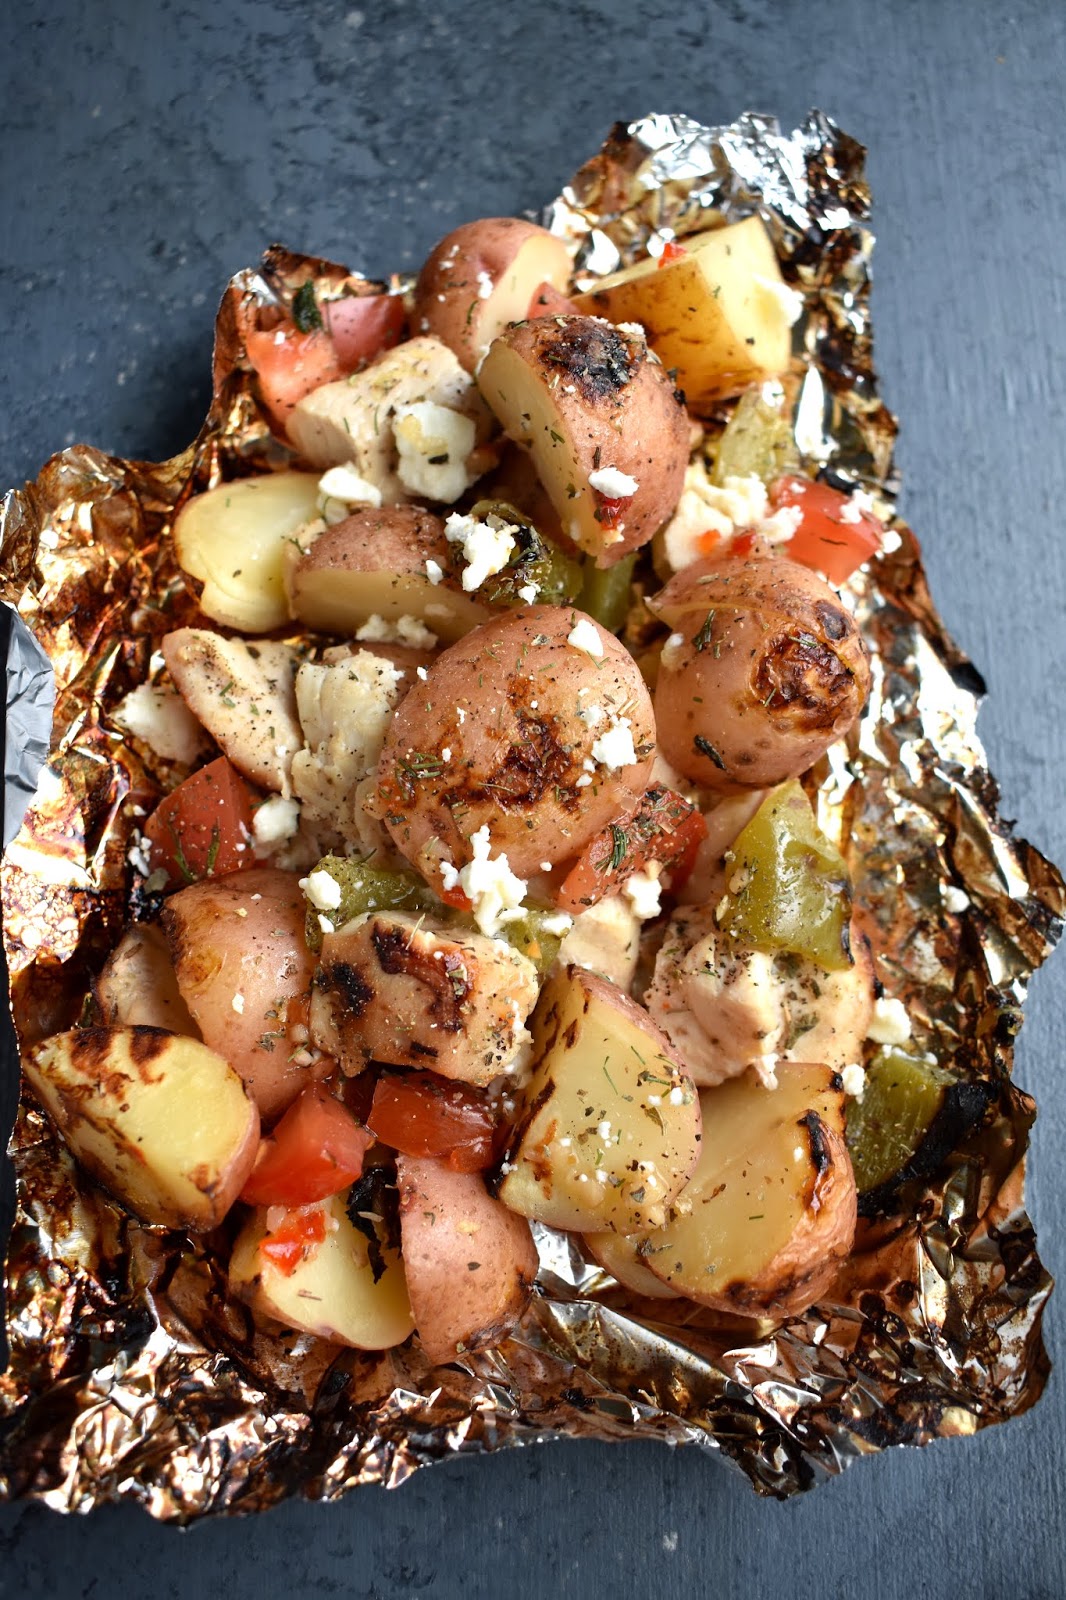 Mediterranean Lemon Chicken and Potatoes are cooked on the grill in a foil packet and are ready in under 30 minutes! Filled with red potatoes, lemon chicken, tomato, dill, green pepper and feta cheese. www.nutritionistreviews.com